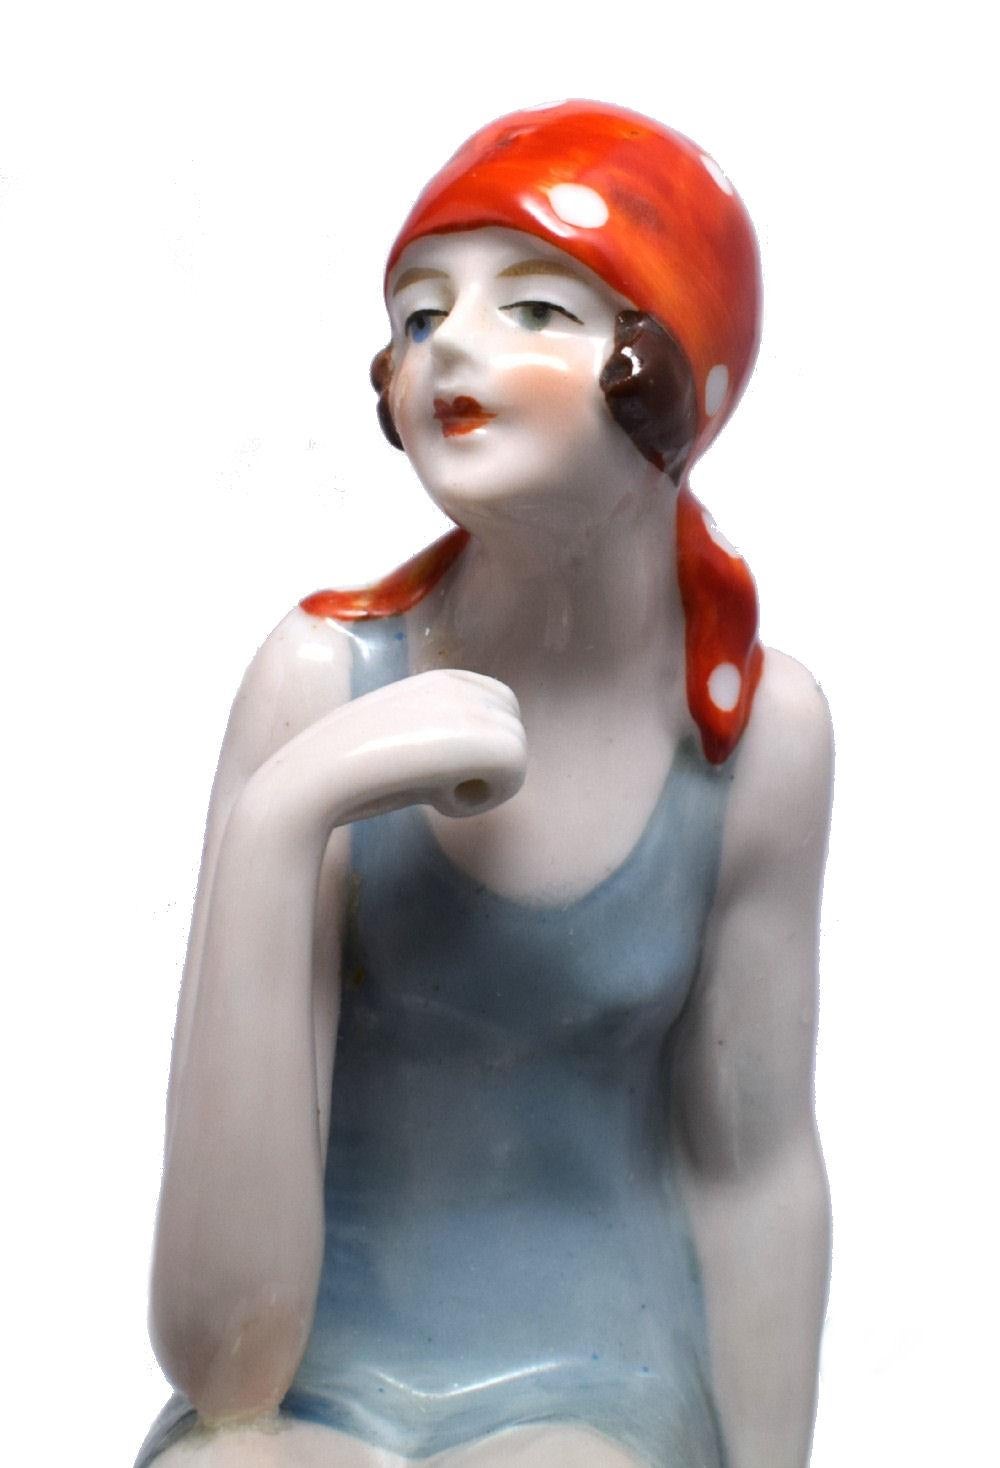 For your consideration is this very charming and totally authentic early 1930's Art Deco Flapper girl hat pin holder. Part of the half doll, pin cushion doll family this beautiful figure is an absolute delight and quite a rarity. Wonderful colouring